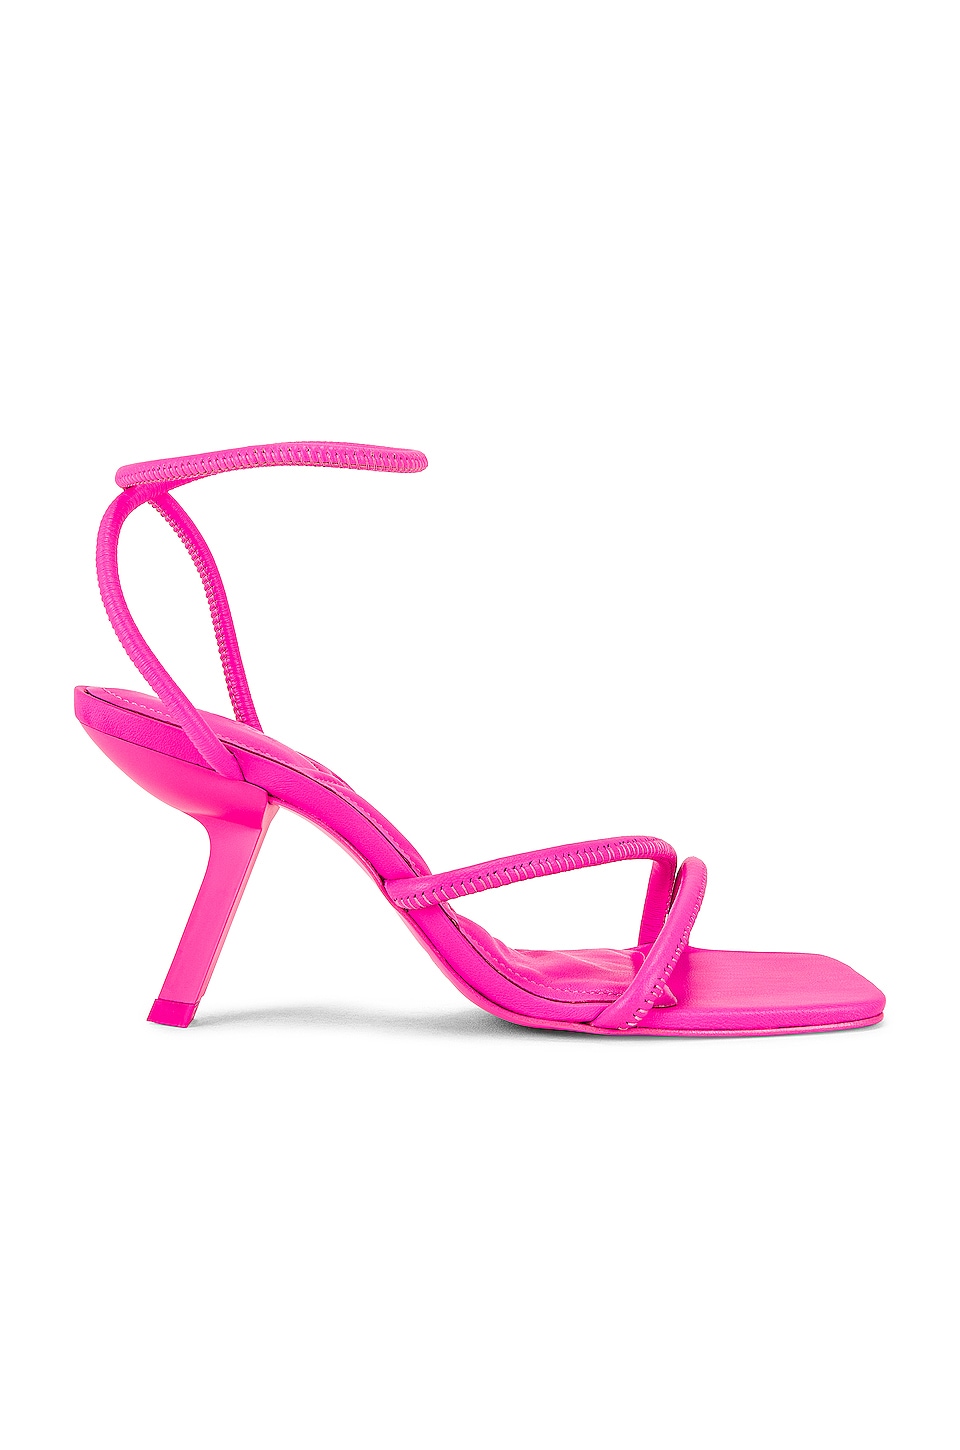 Hot pink strappy sandals